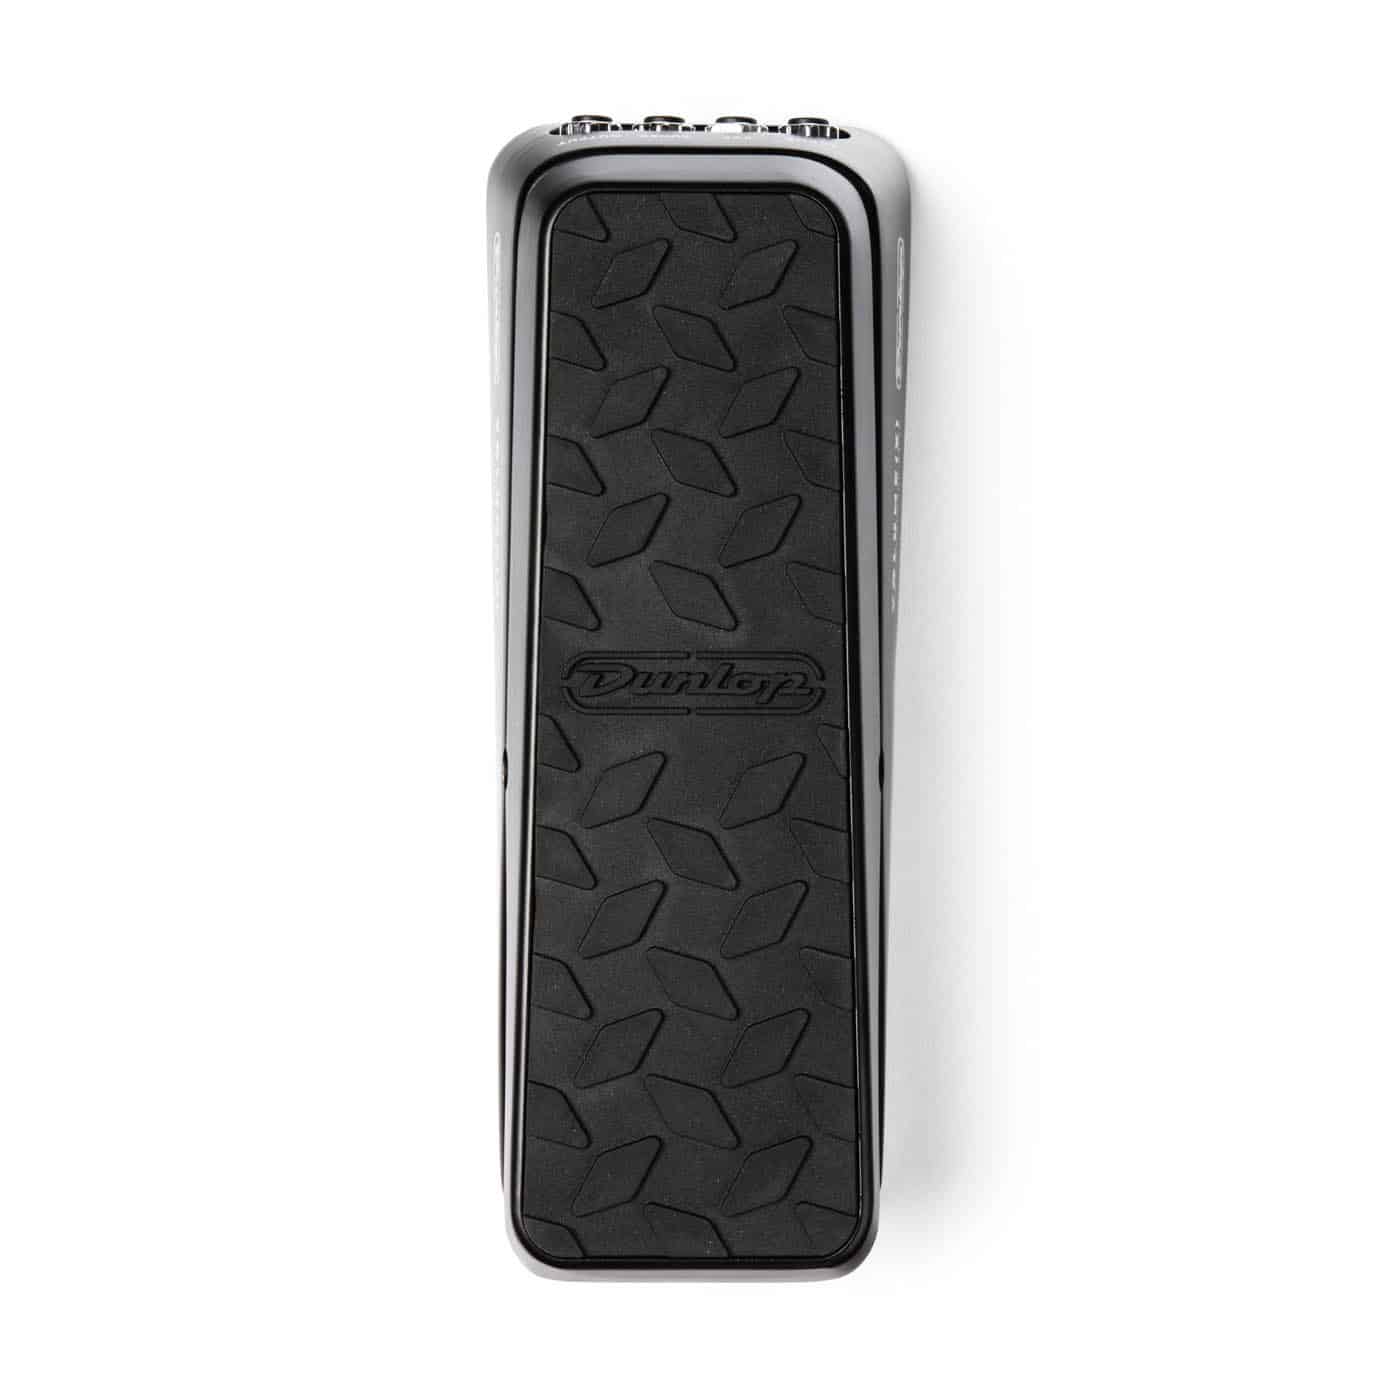 Picture of a DVP3 Dunlop Volume (X) Pedal